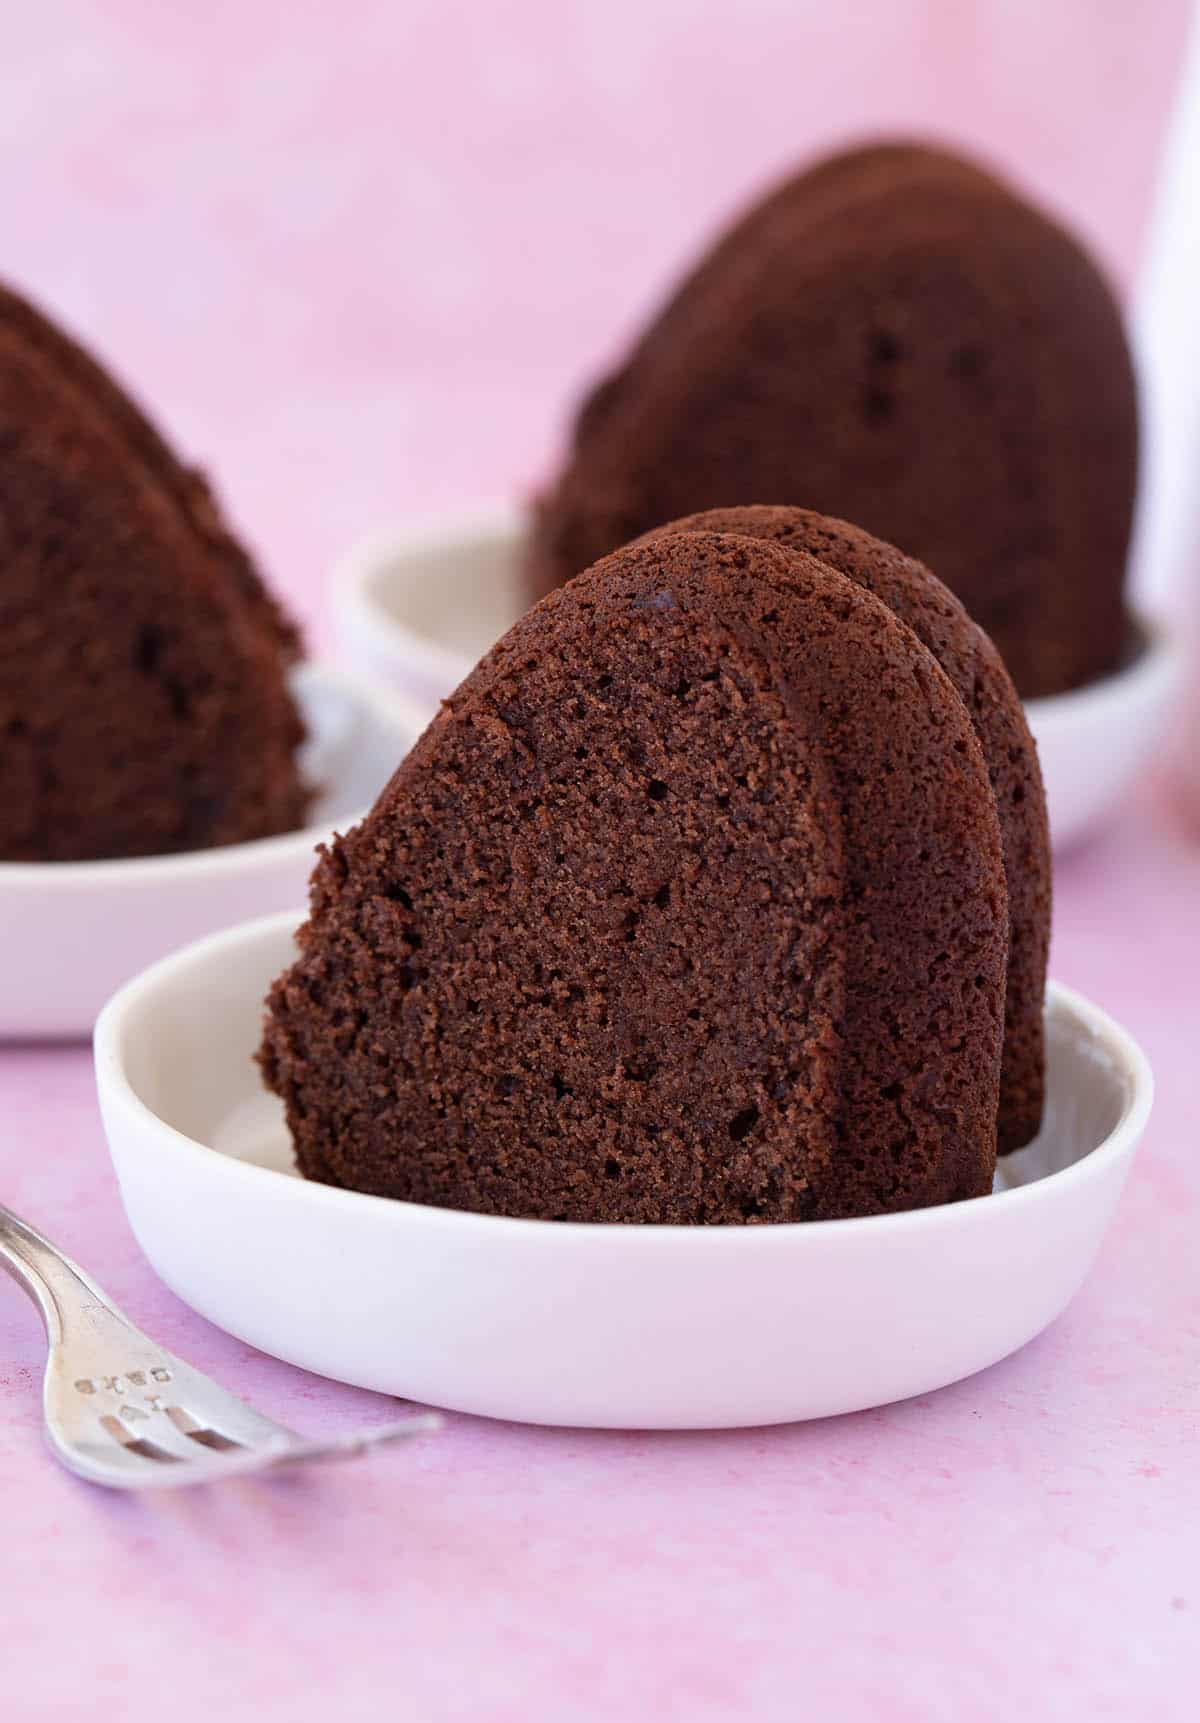 Slices of Chocolate Pound Cake on a pink background